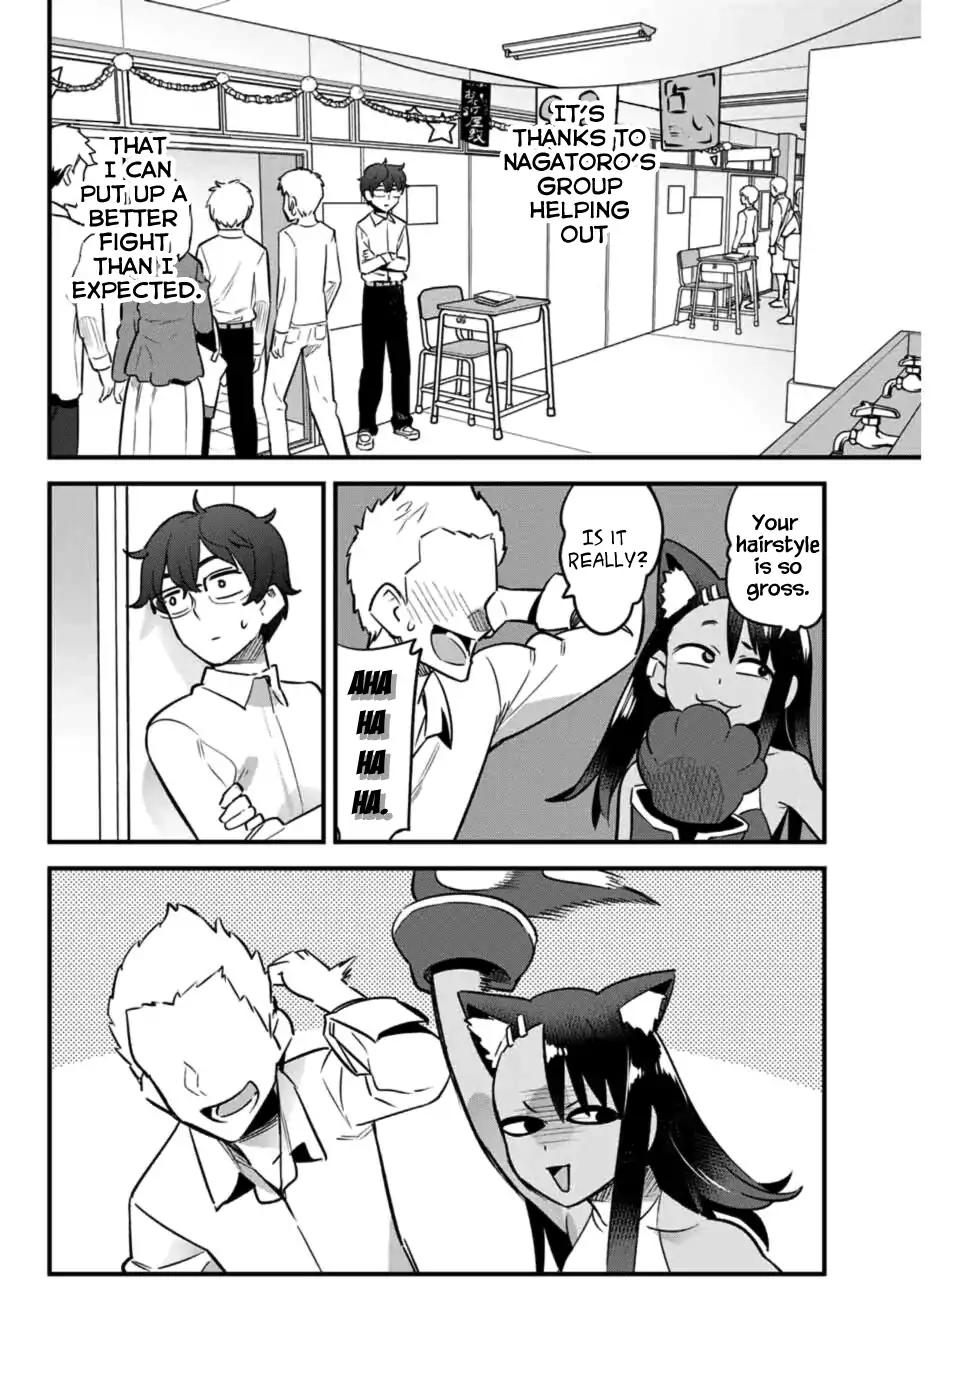 Please don't bully me, Nagatoro chapter 44 page 14